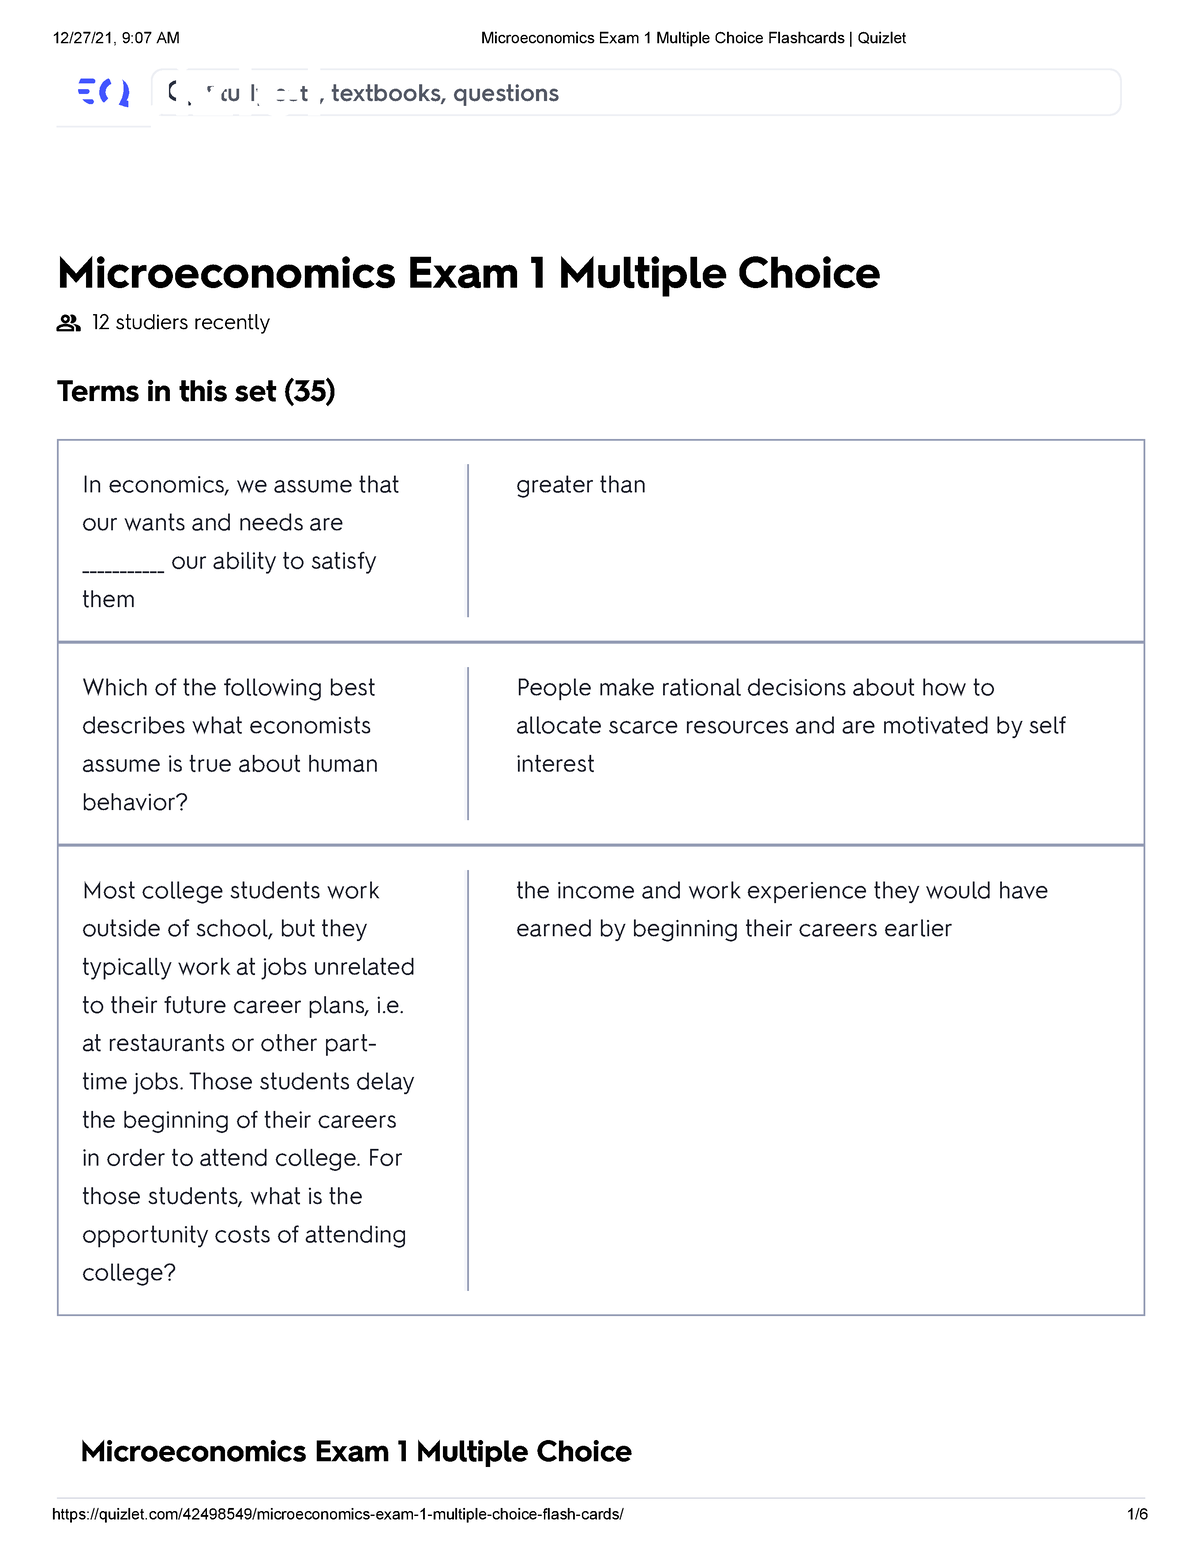 Chapter 1 (3 sections) Introduction to Economics Flashcards